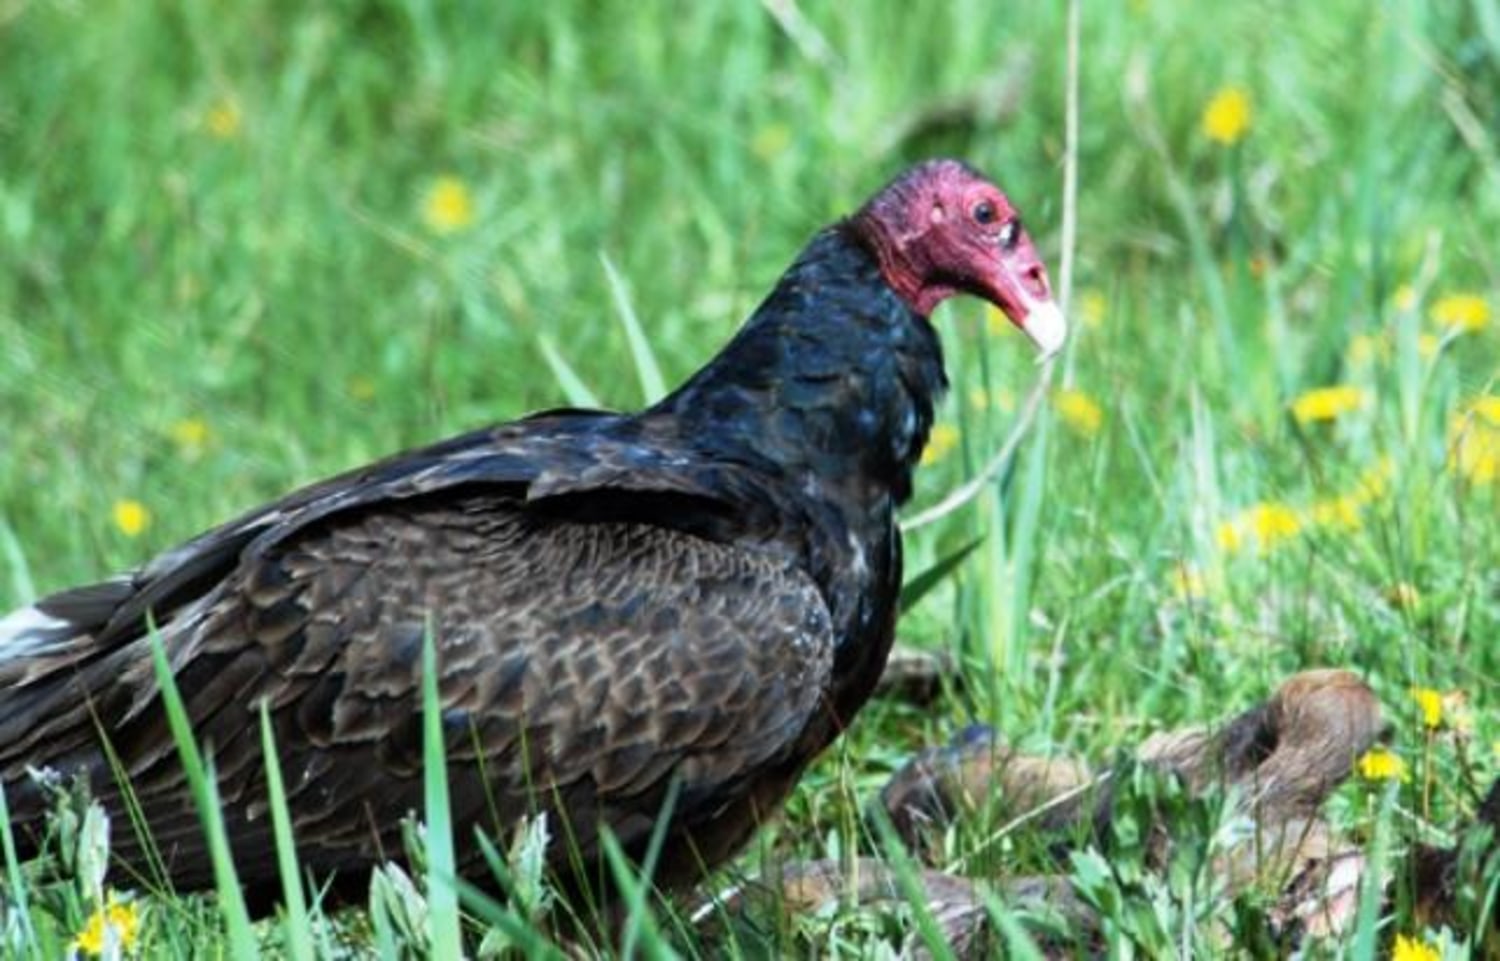 How Vultures Can Eat Rotting Flesh Without Getting Sick